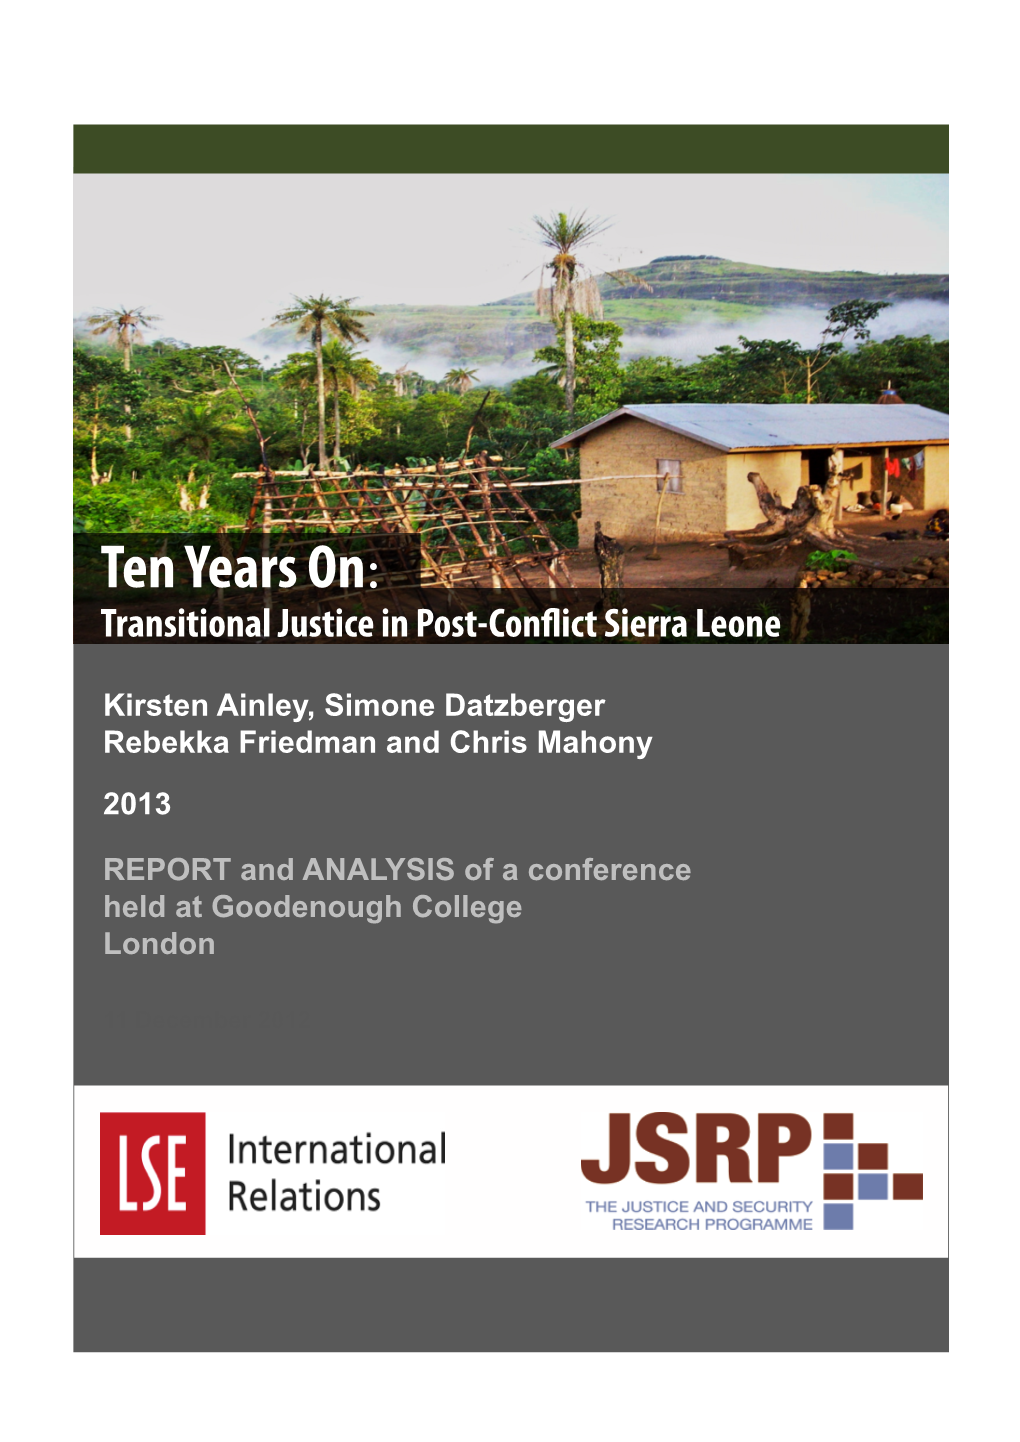 Ten Years On: Transitional Justice in Post-Conflict Sierra Leone